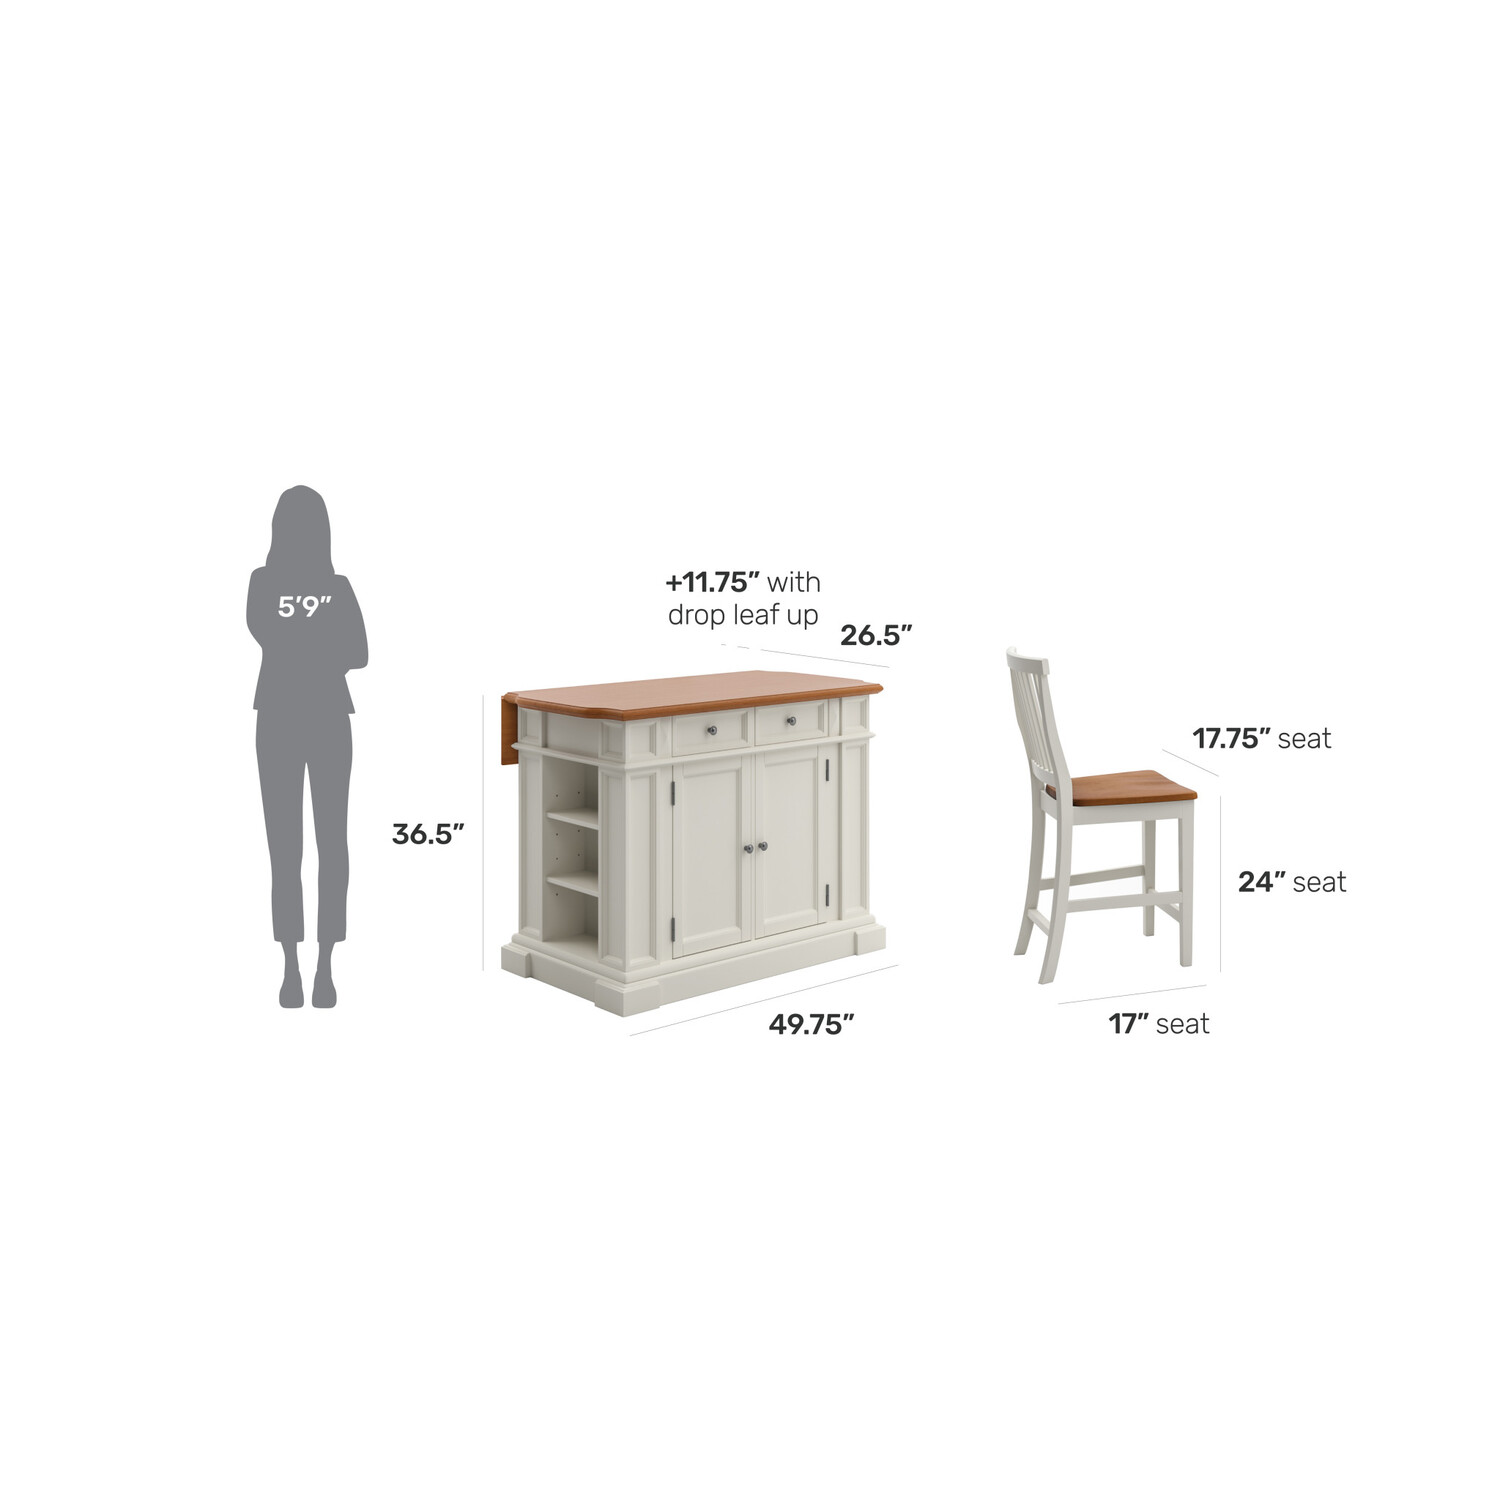 Homestyles Americana Wood Kitchen Island Set in Off White - image 2 of 7